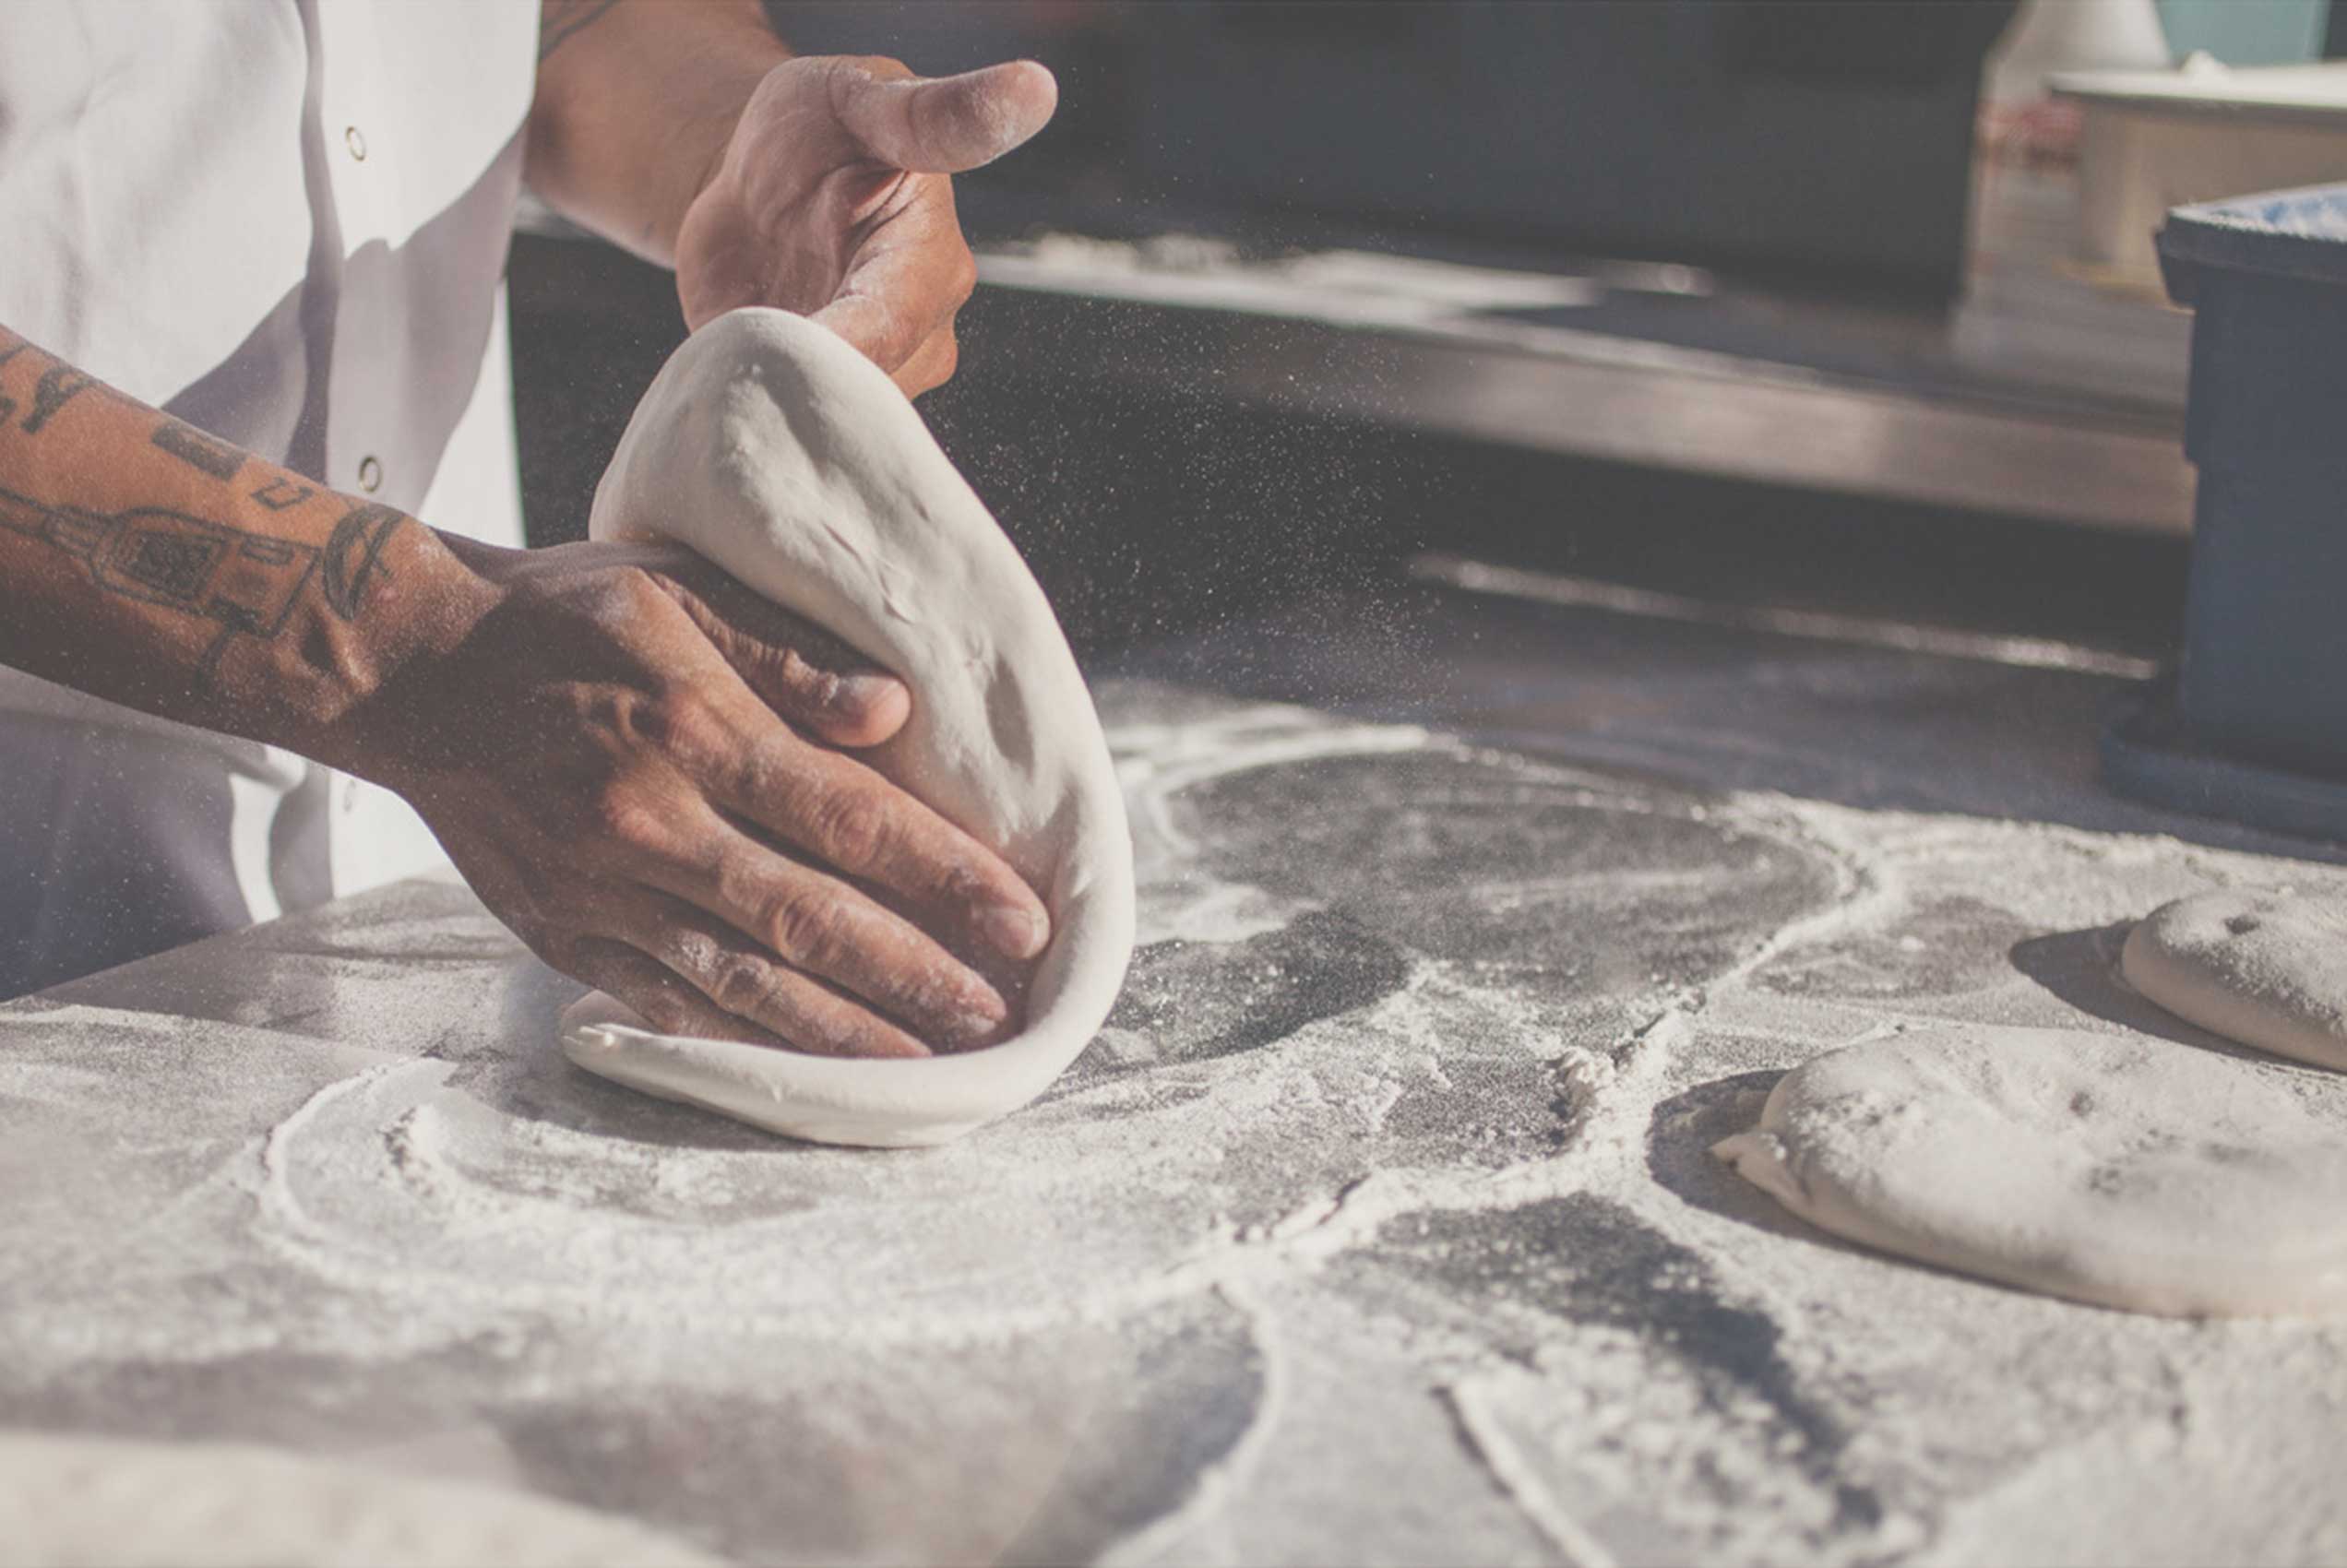 Two hands kneading pizza dough on floured surface in kitchen